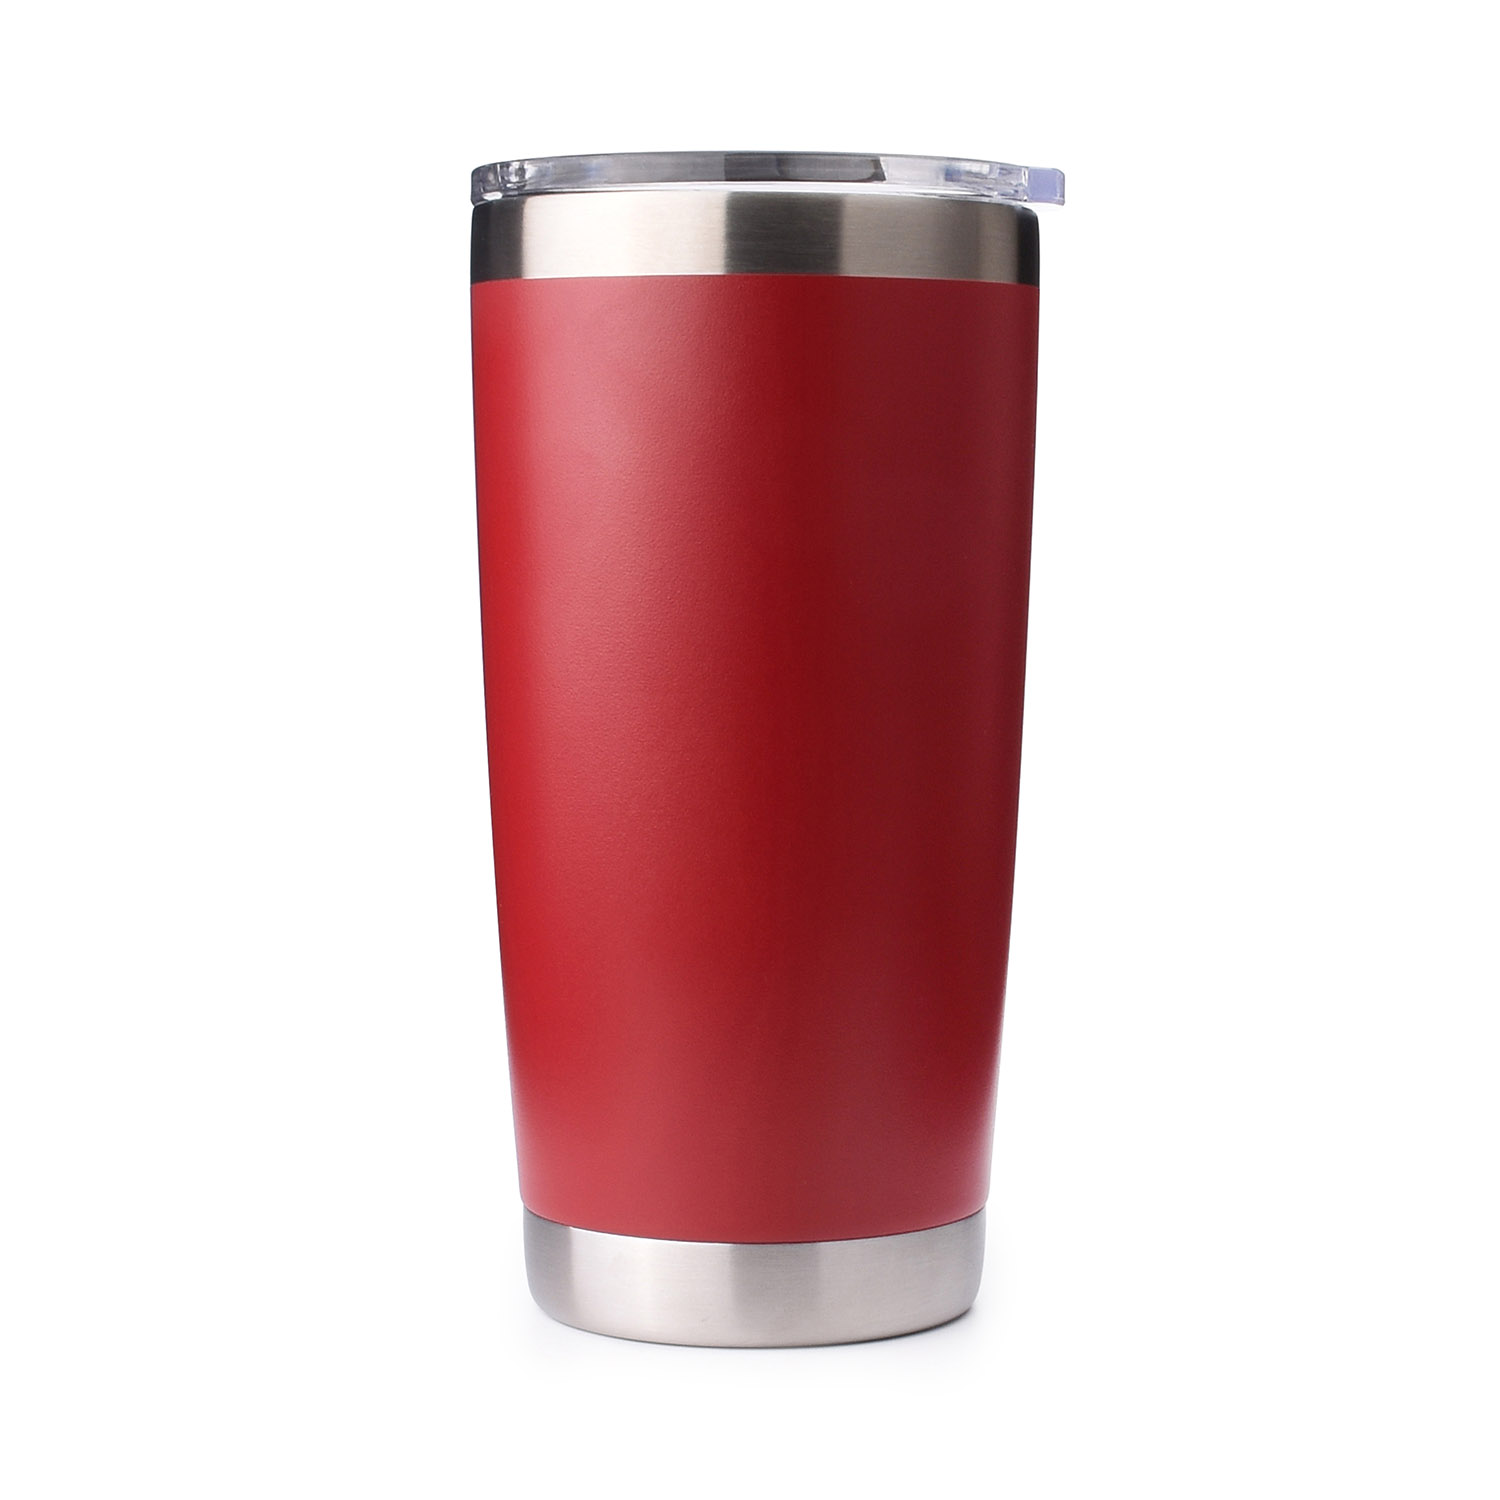 https://www.waterbottle.tech/wp-content/uploads/2021/05/20-oz-tumbler-with-magnetic-slider-lid-s2120a3-1.jpg